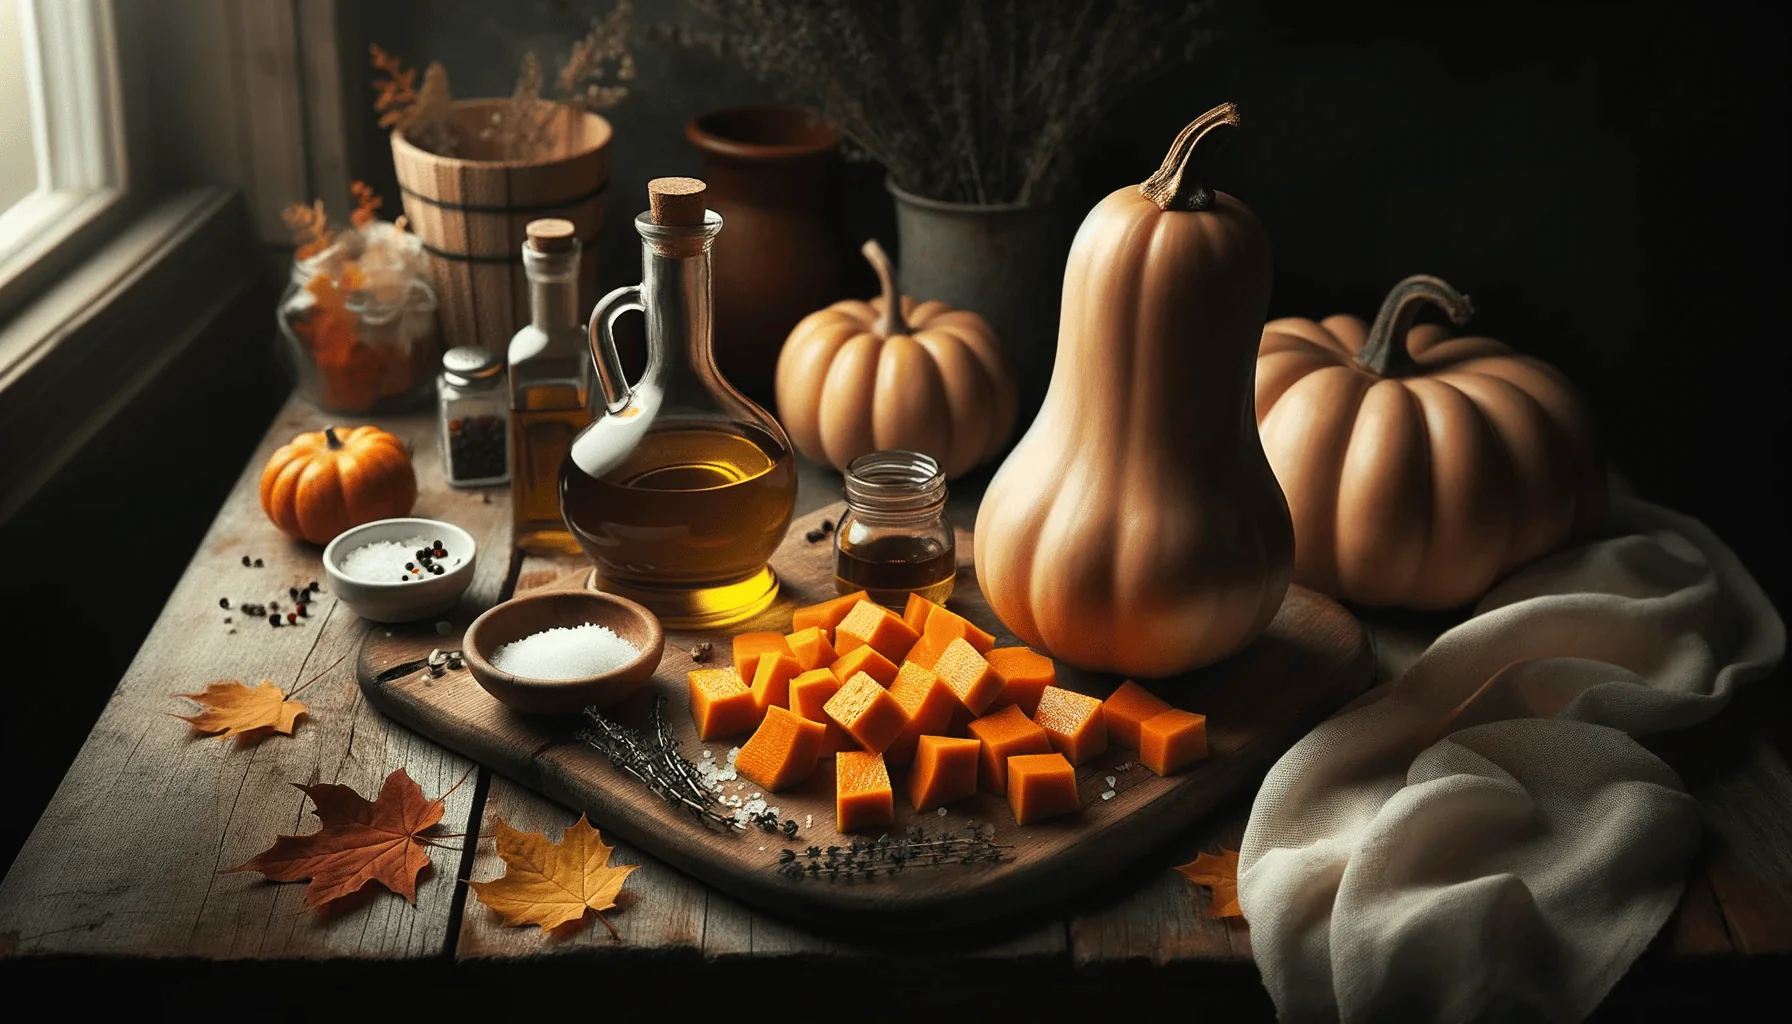 The ingredients for my maple-roasted butternut squash recipe